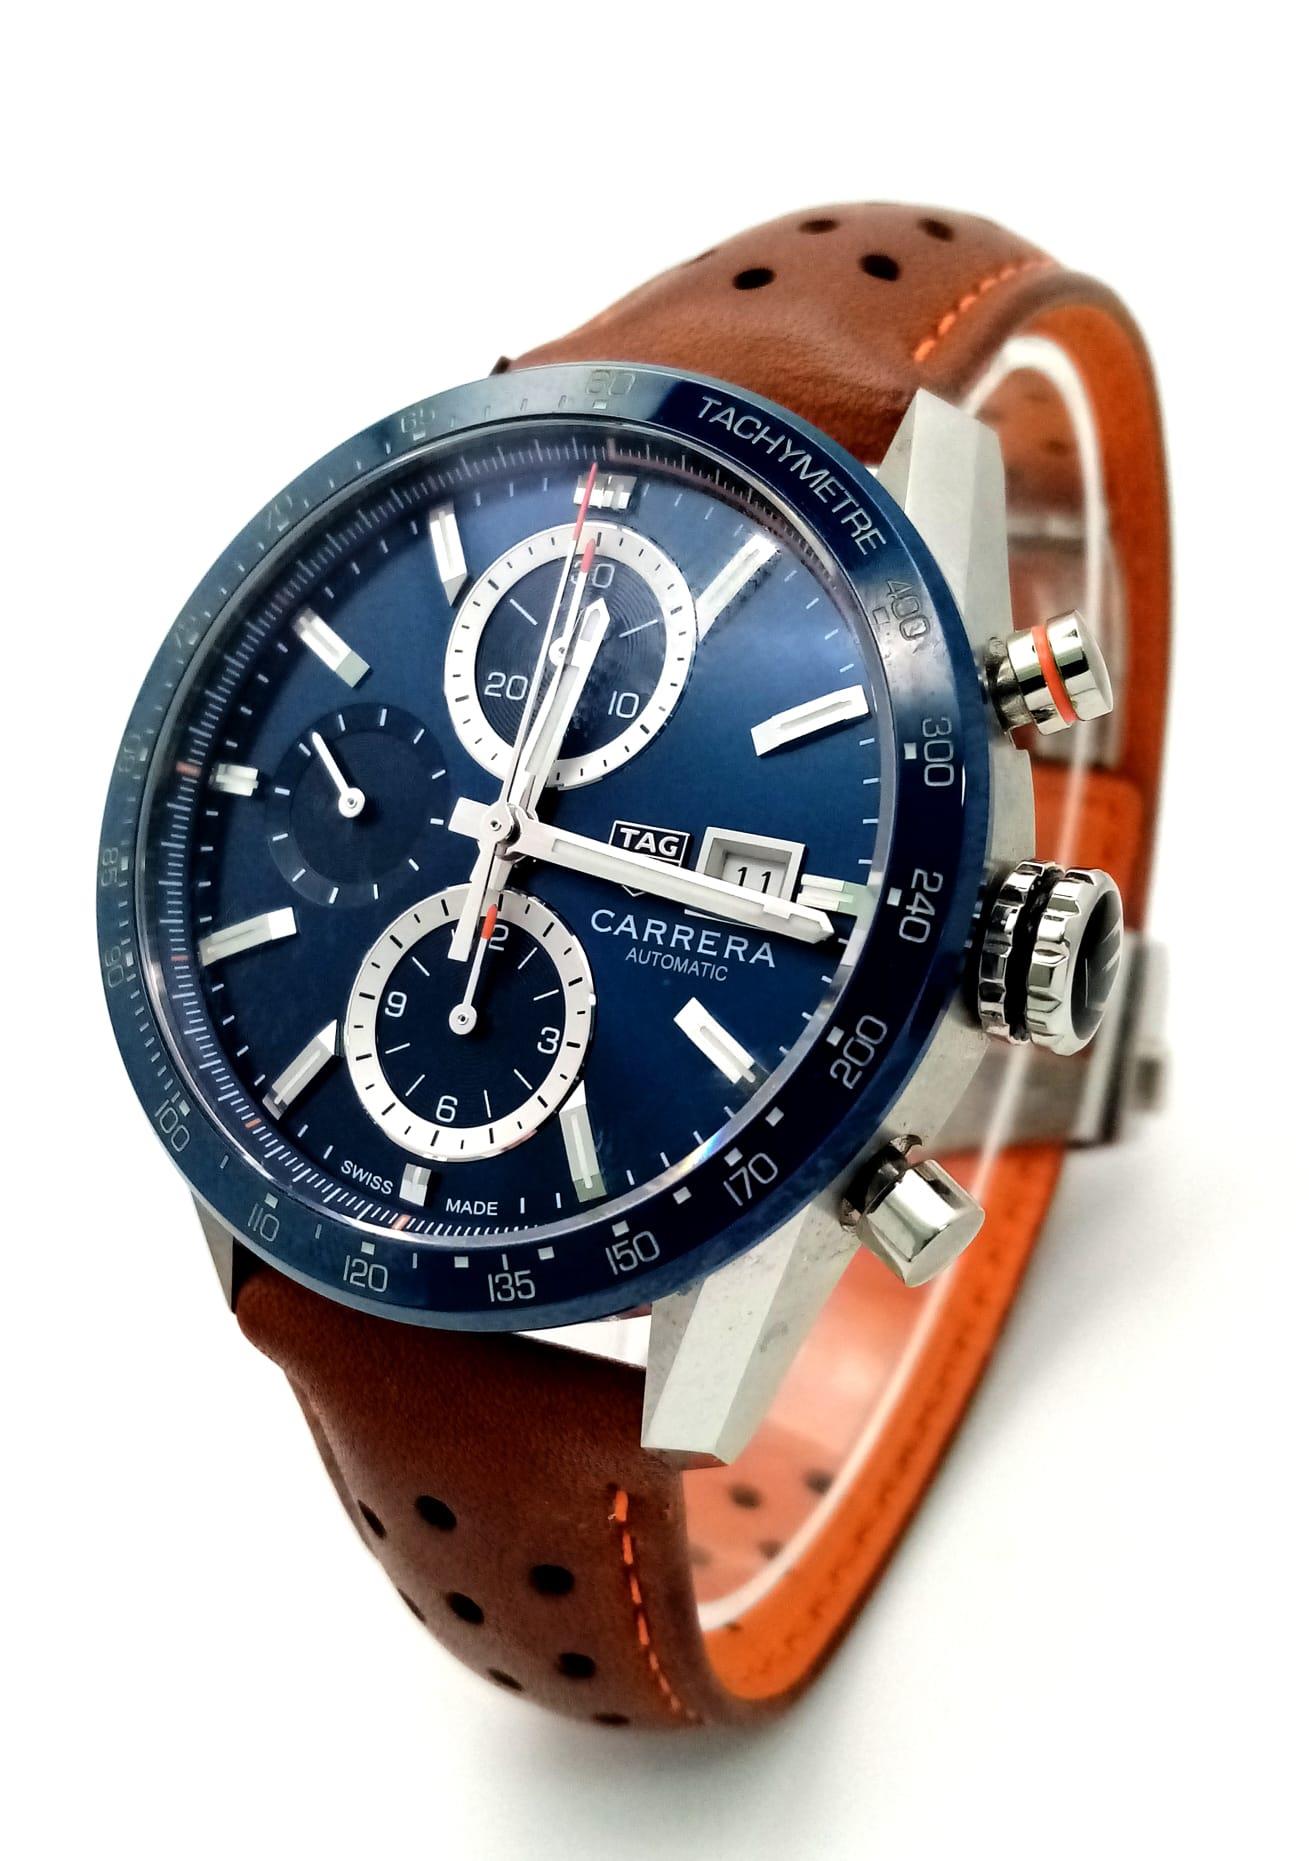 A Tag Heuer Carrera Automatic Gents Chronograph Watch. Brown leather strap. Stainless steel case -